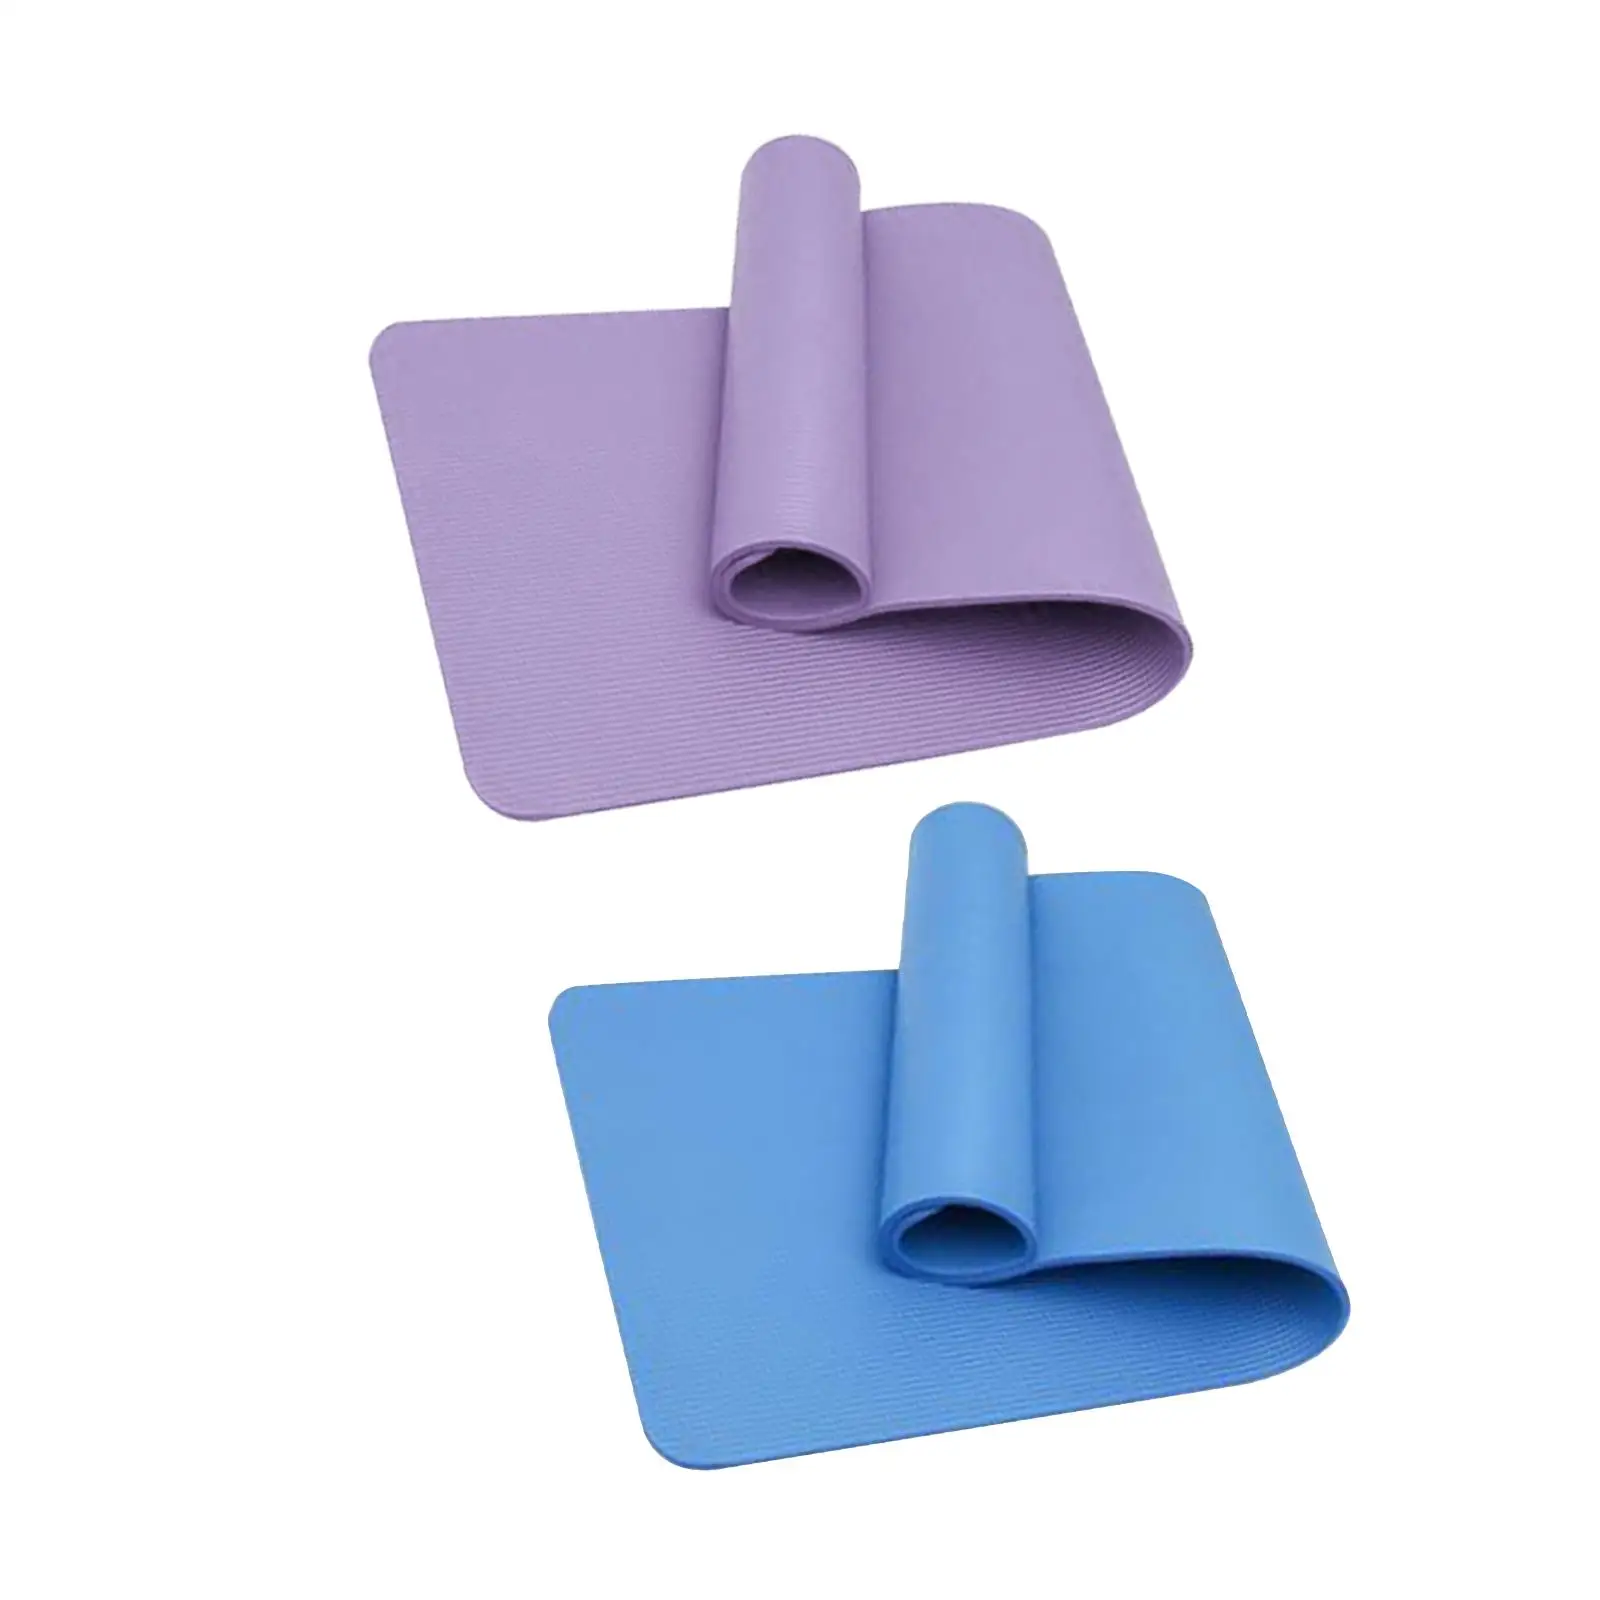 Yoga Mats Sports Fitness Mats Cushion Widened Thickened Lengthened Anti Skid Men and Women Knee Pad for Dance Home Gym Floor